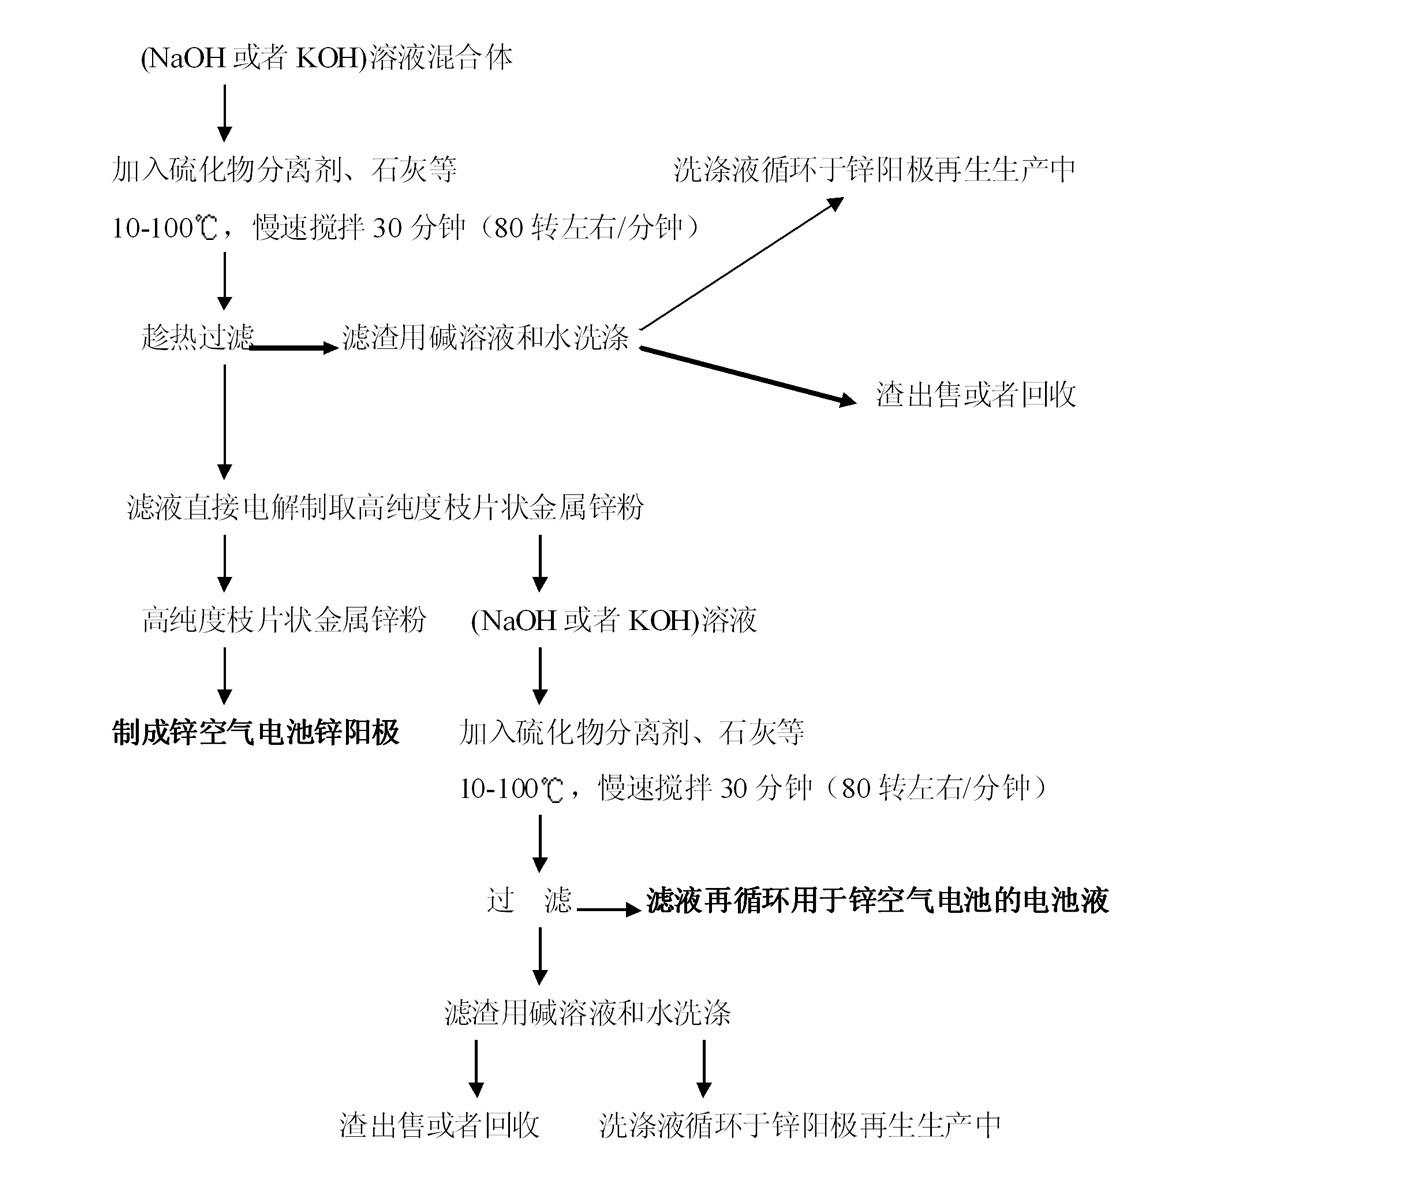 Method for producing zinc powder and battery fluid from battery zinc anode waste and battery waste fluid